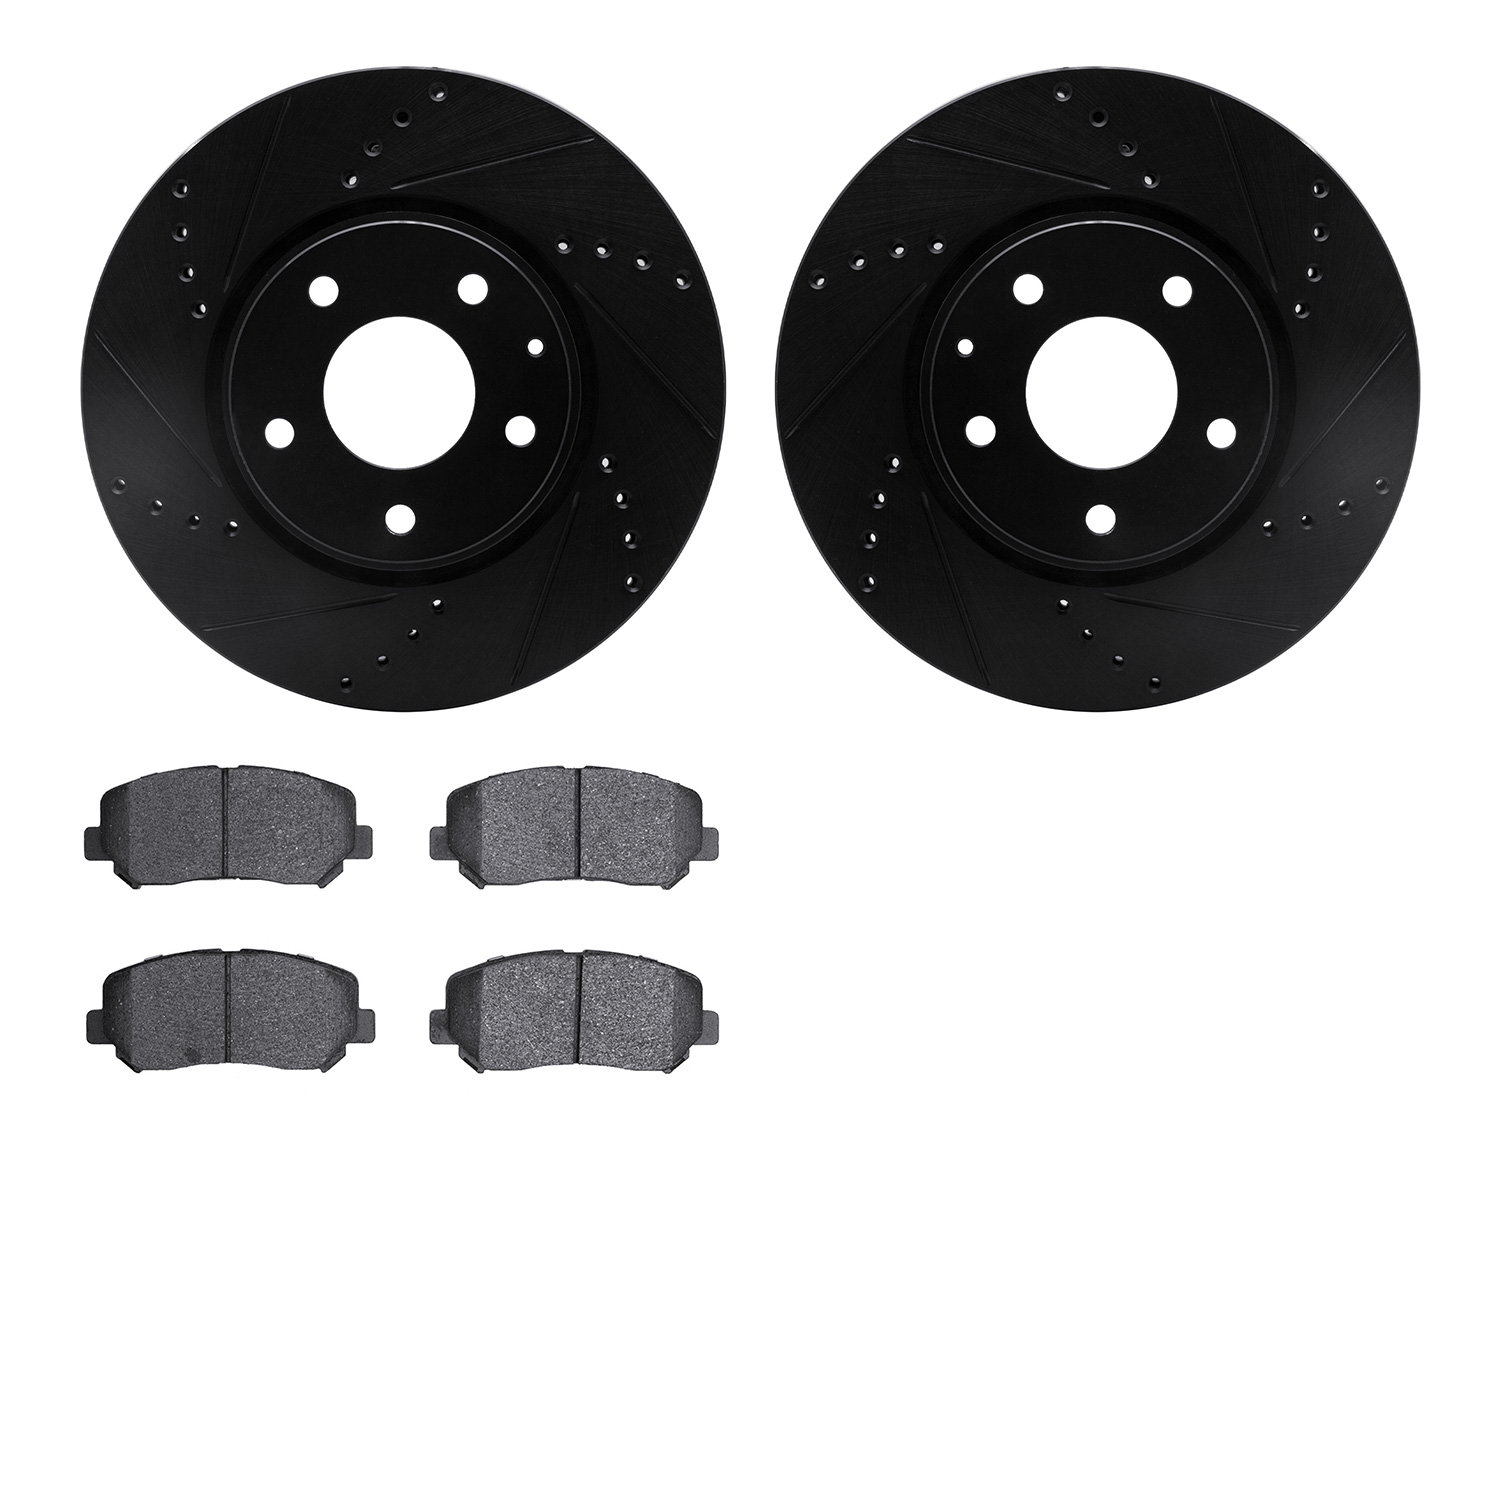 8302-80074 Drilled/Slotted Brake Rotors with 3000-Series Ceramic Brake Pads Kit [Black], Fits Select Ford/Lincoln/Mercury/Mazda,